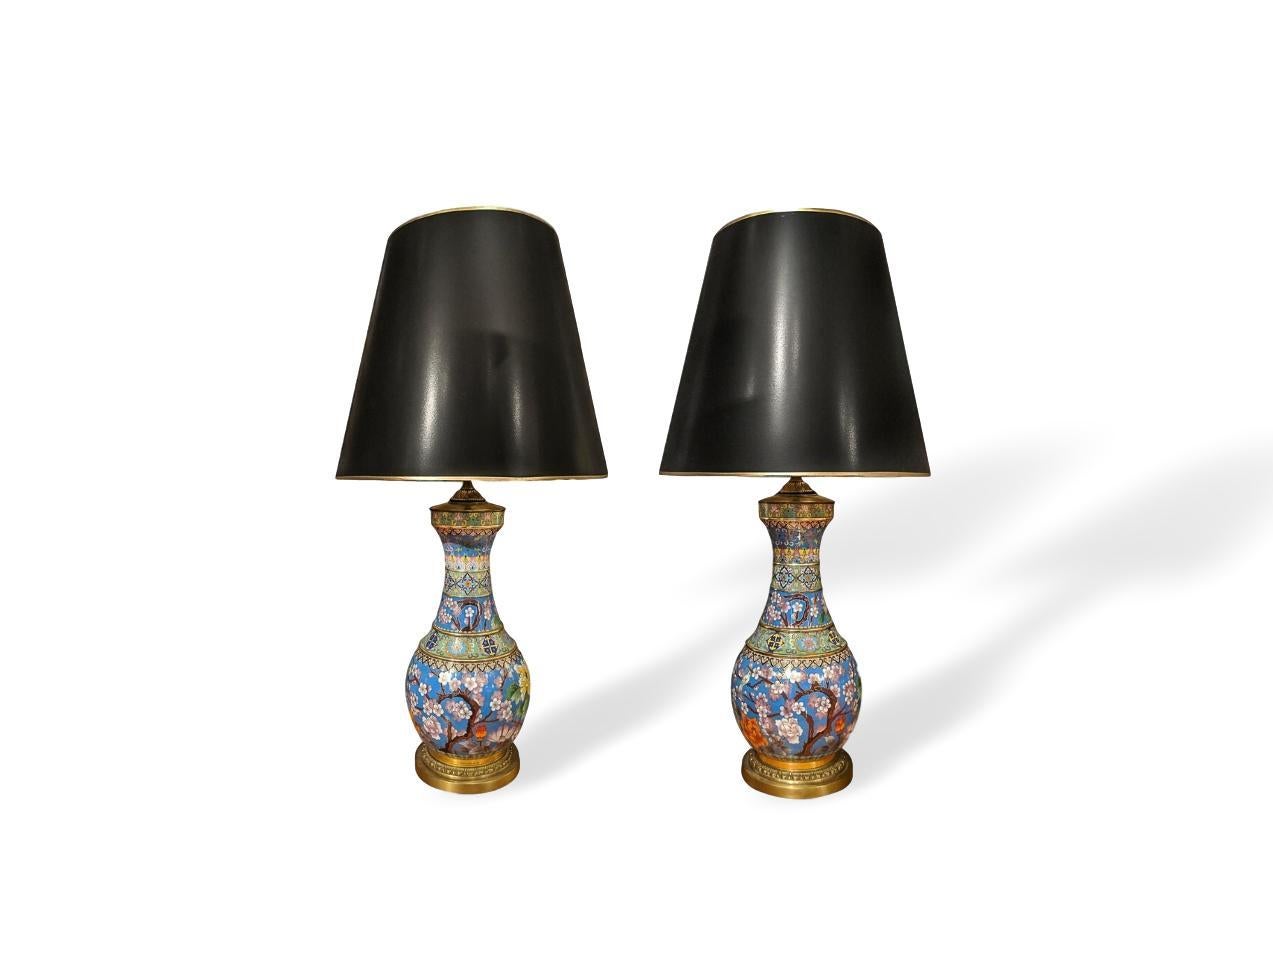 20th century Cloisonne vases converted to lamps by Summer Hour Lamps of Charlotte. Enamel on bronze and fired.